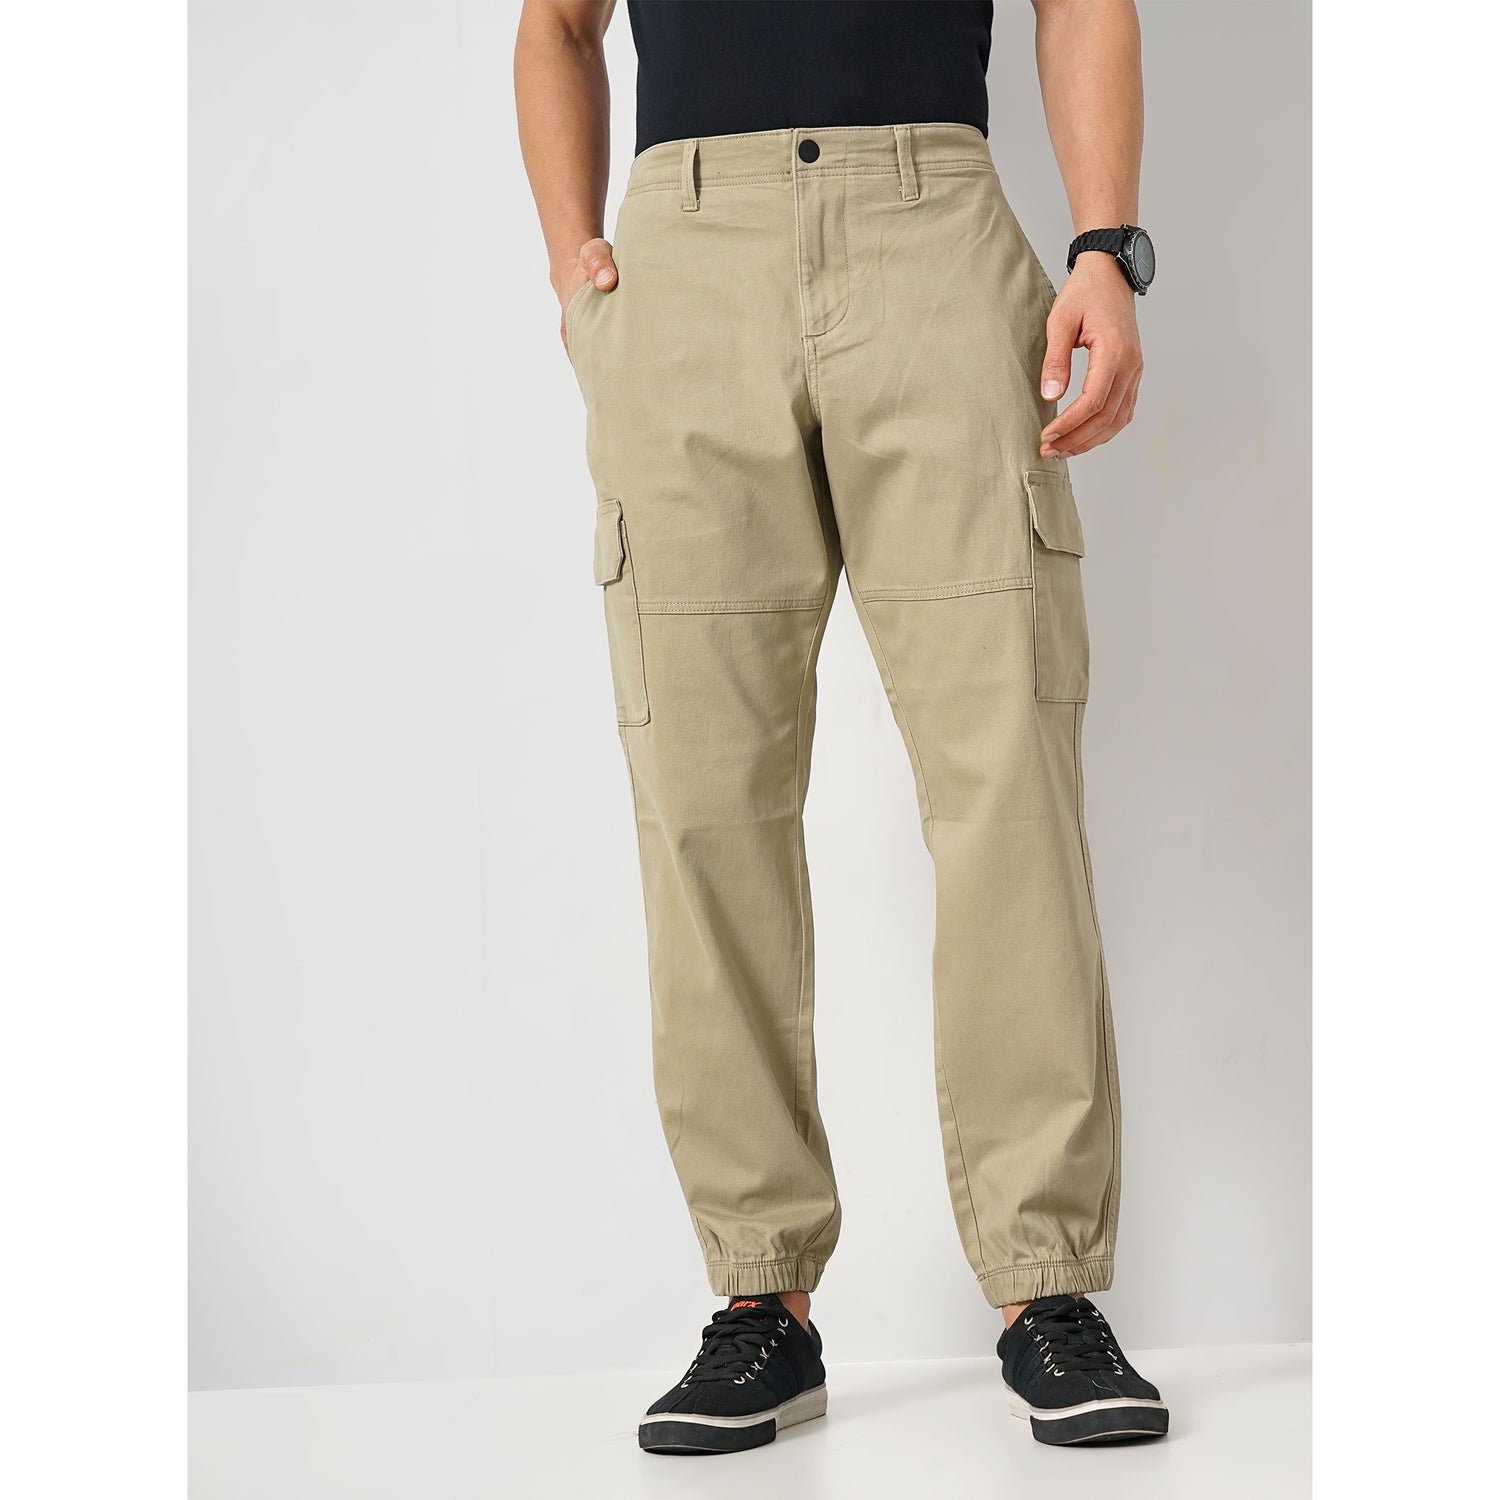 Men's Green Solid Regular Fit Cotton Cargo Trousers (DOLYTE1)